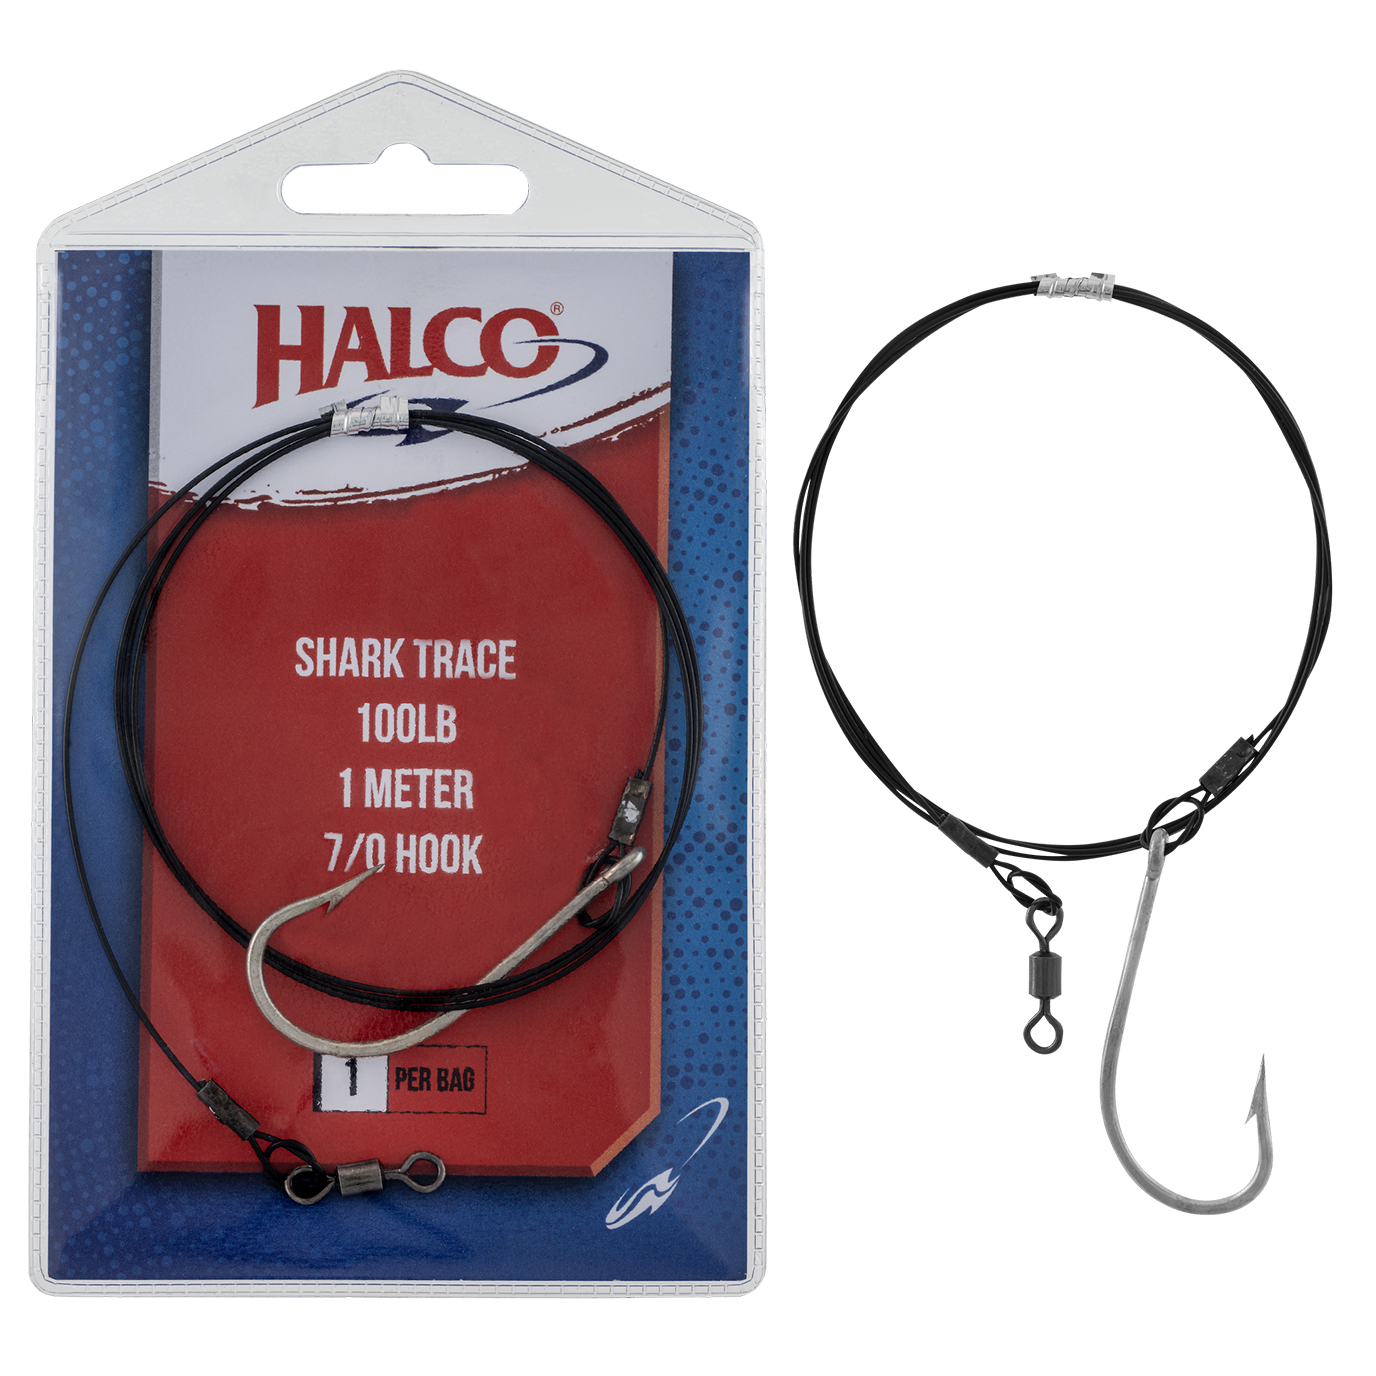 WIRE SHARK TRACE 200LB WITH 12/0 CIRCLE HOOK - Tackle Direct Ireland